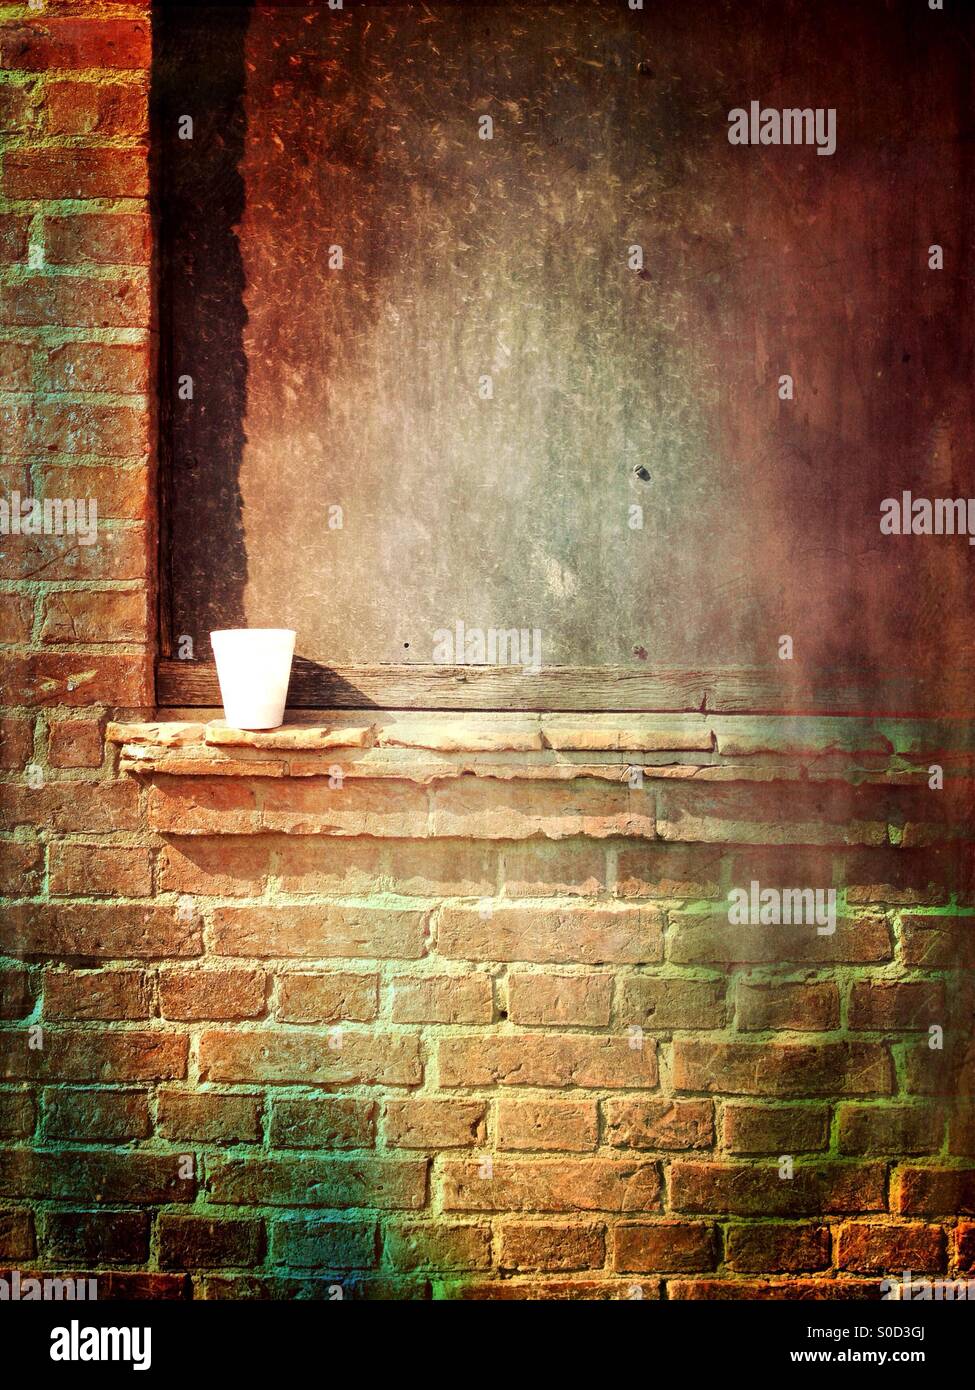 Isolated coffee cup on a wall Stock Photo